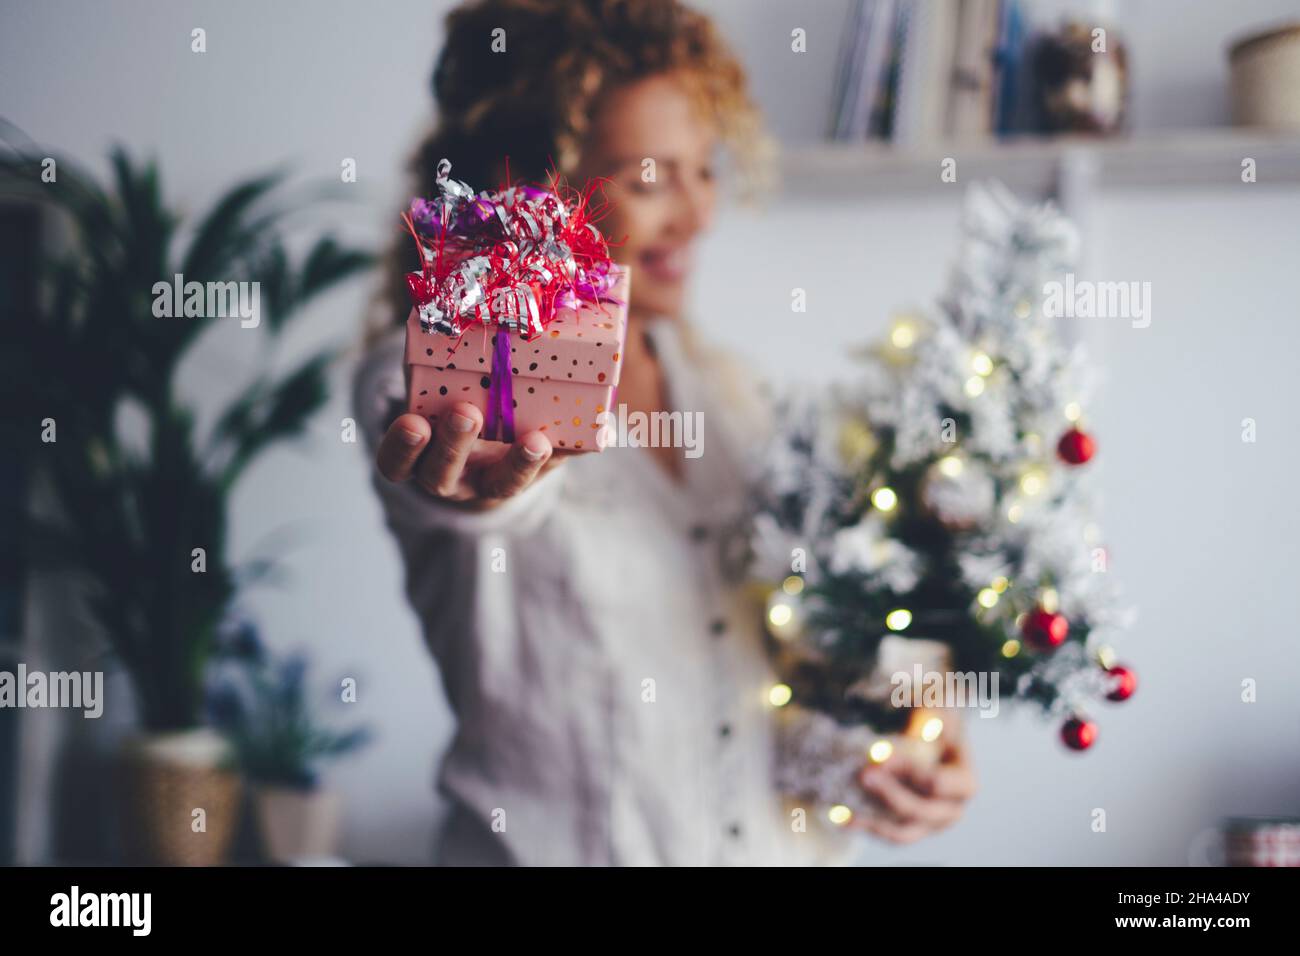 close up of christmas gift and defocused happy woman holding tree and decoration at home during xmas celebration holidays seasons. concept of gift exchange and people Stock Photo